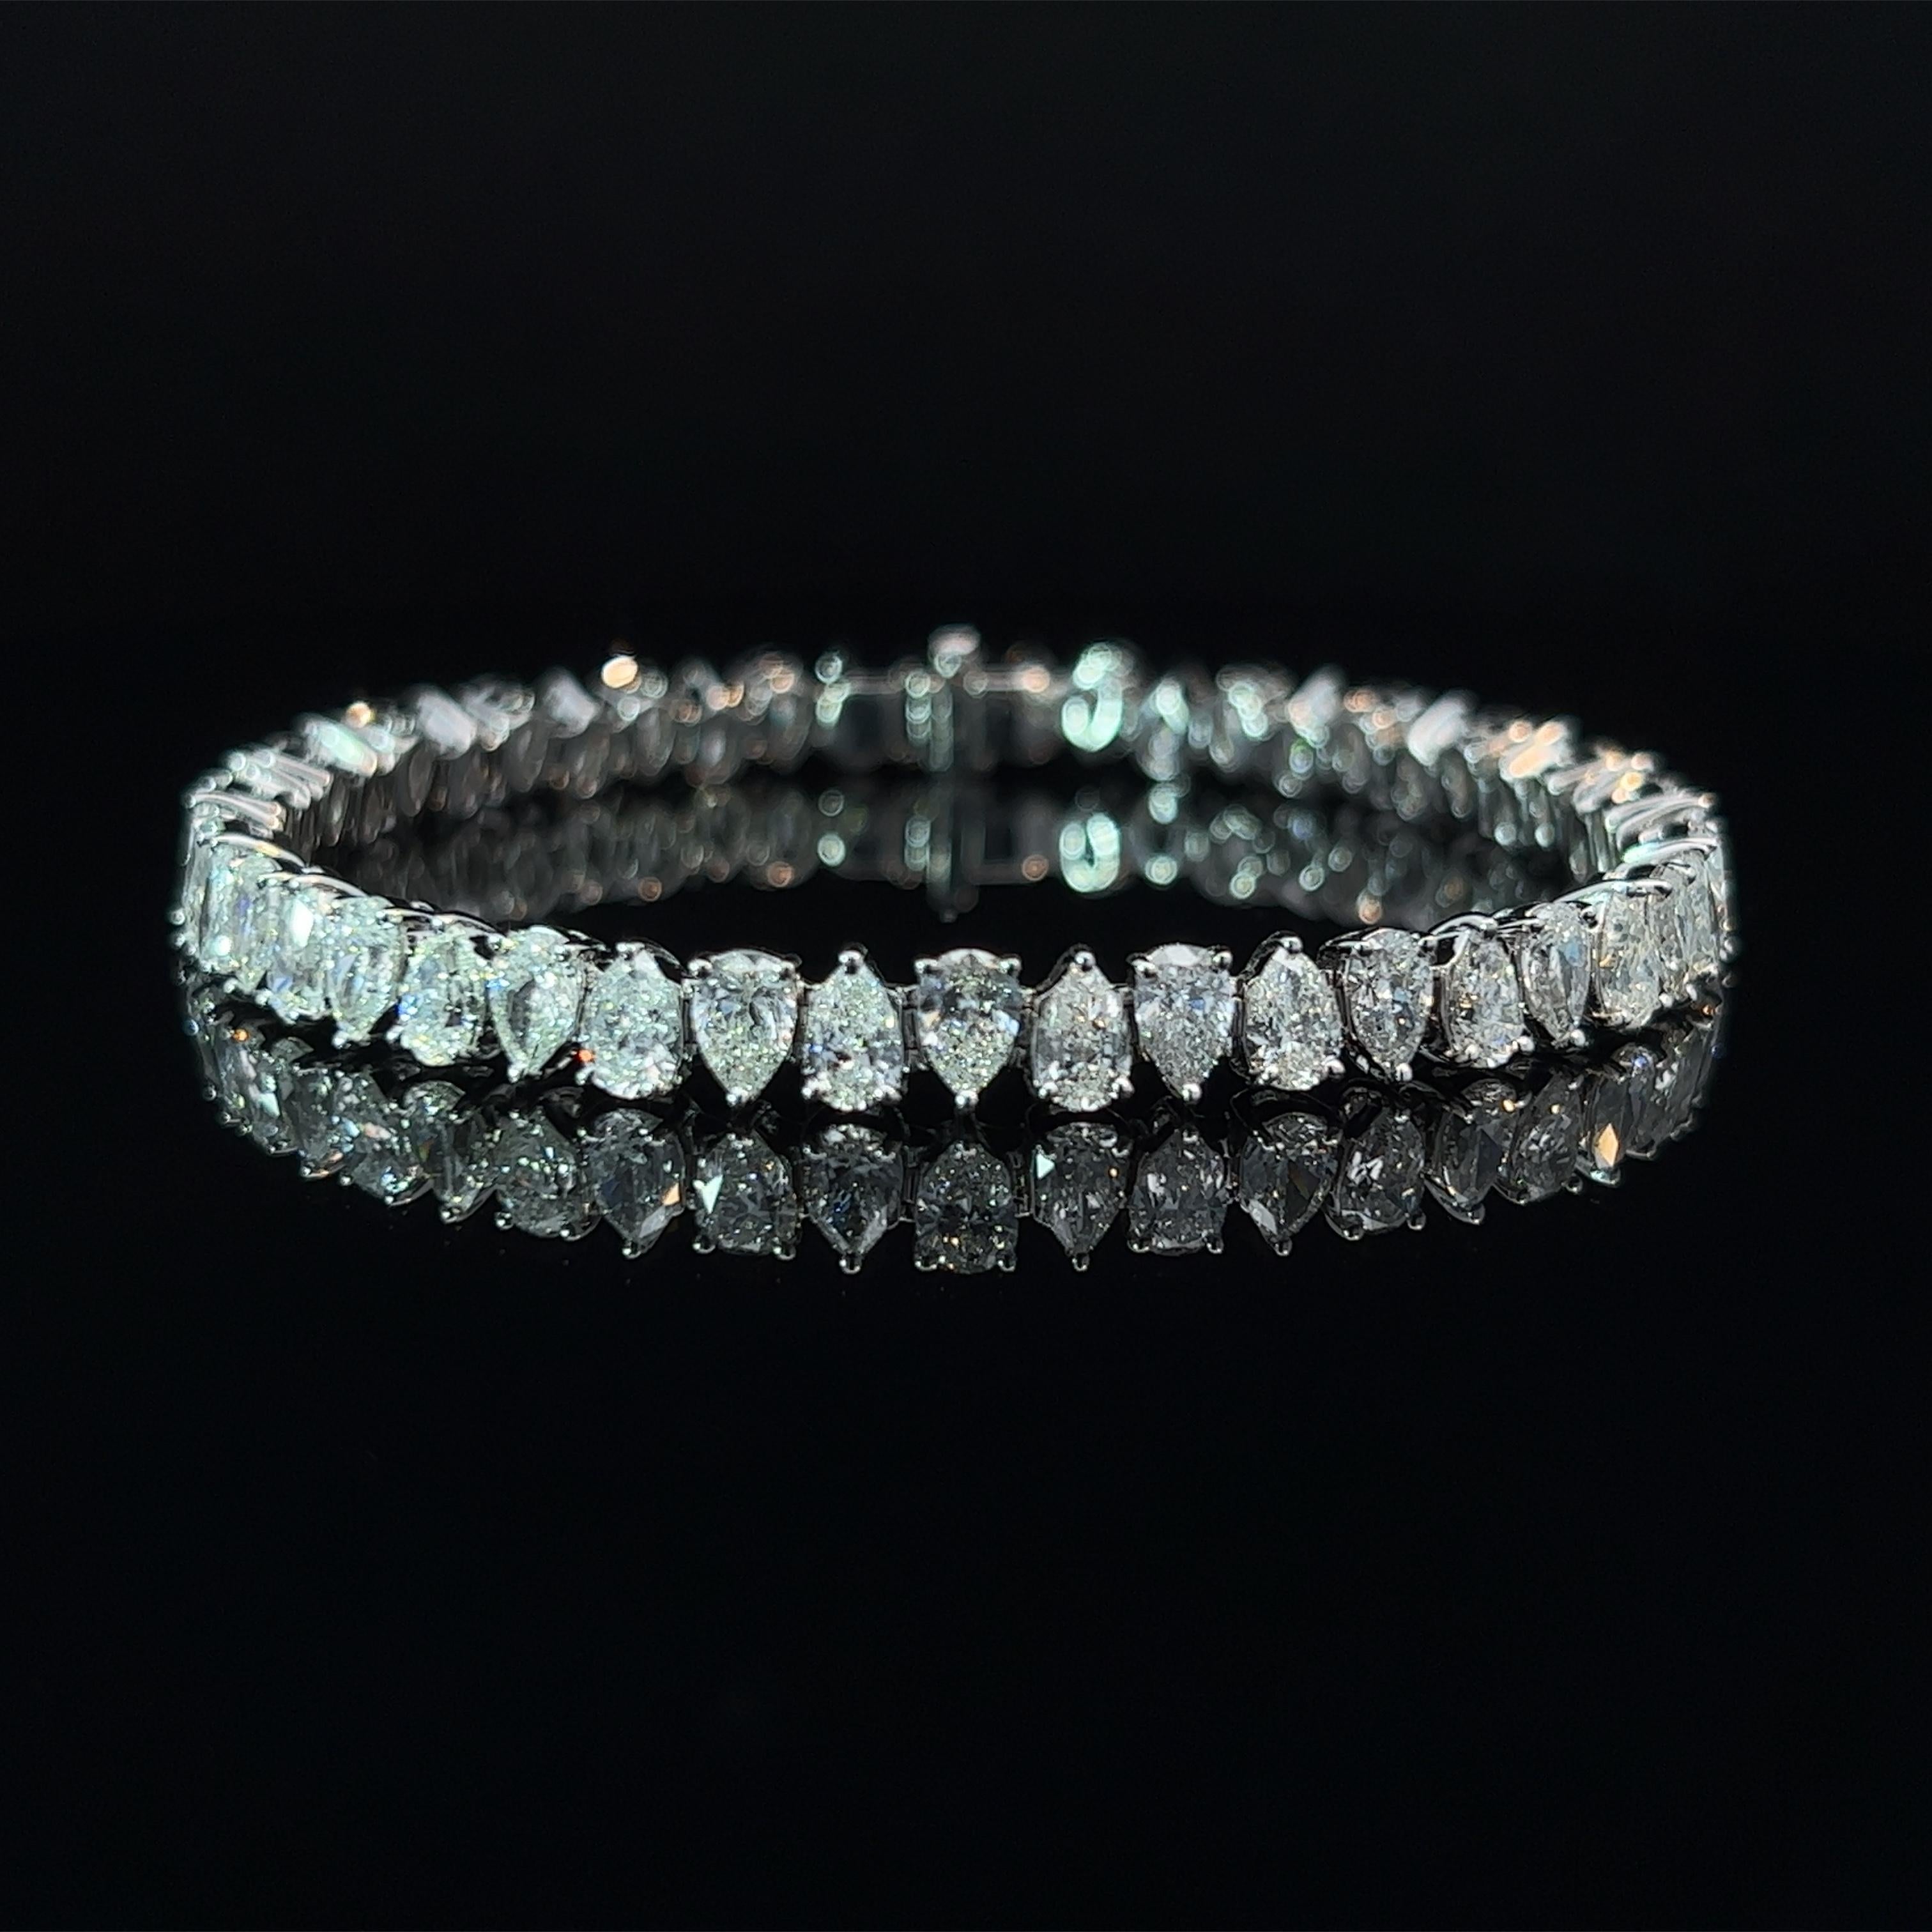 Diamond Shape: Pear Cut 
Total Diamond Weight: 11.65ct
Individual Diamond Weight: .25ct
Color/Clarity: GH SI  
Metal: 18K White Gold  
Metal Weight: 18.02g 

Key Features:

Pear-Cut Diamonds: The centerpiece of this bracelet boasts a dazzling array